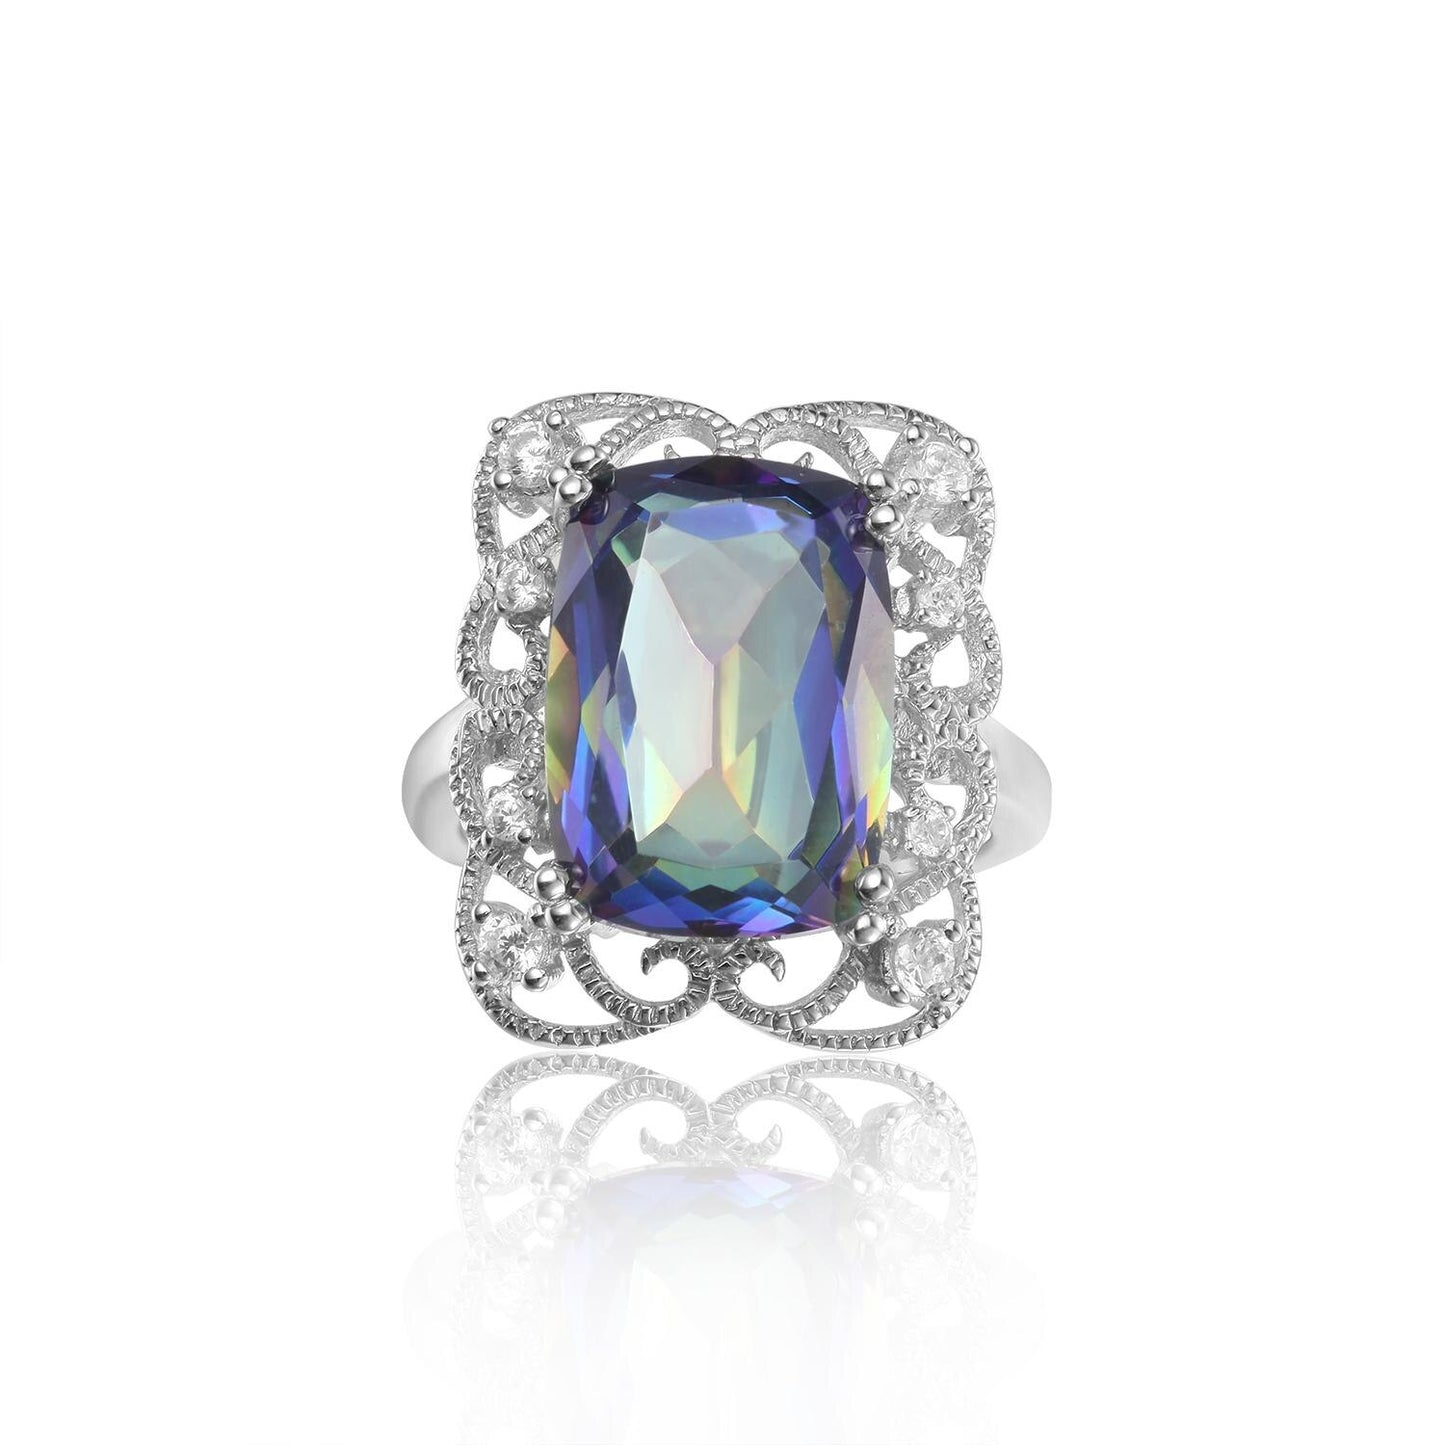 GEM&#39;S BALLET Flower Lace Cocktail Ring 9.66Ct 10x14mm Cushion Huge Mystic Topaz Statement Ring in Sterling Silver Gift For Her Mystic Topaz|925 Sterling Silver